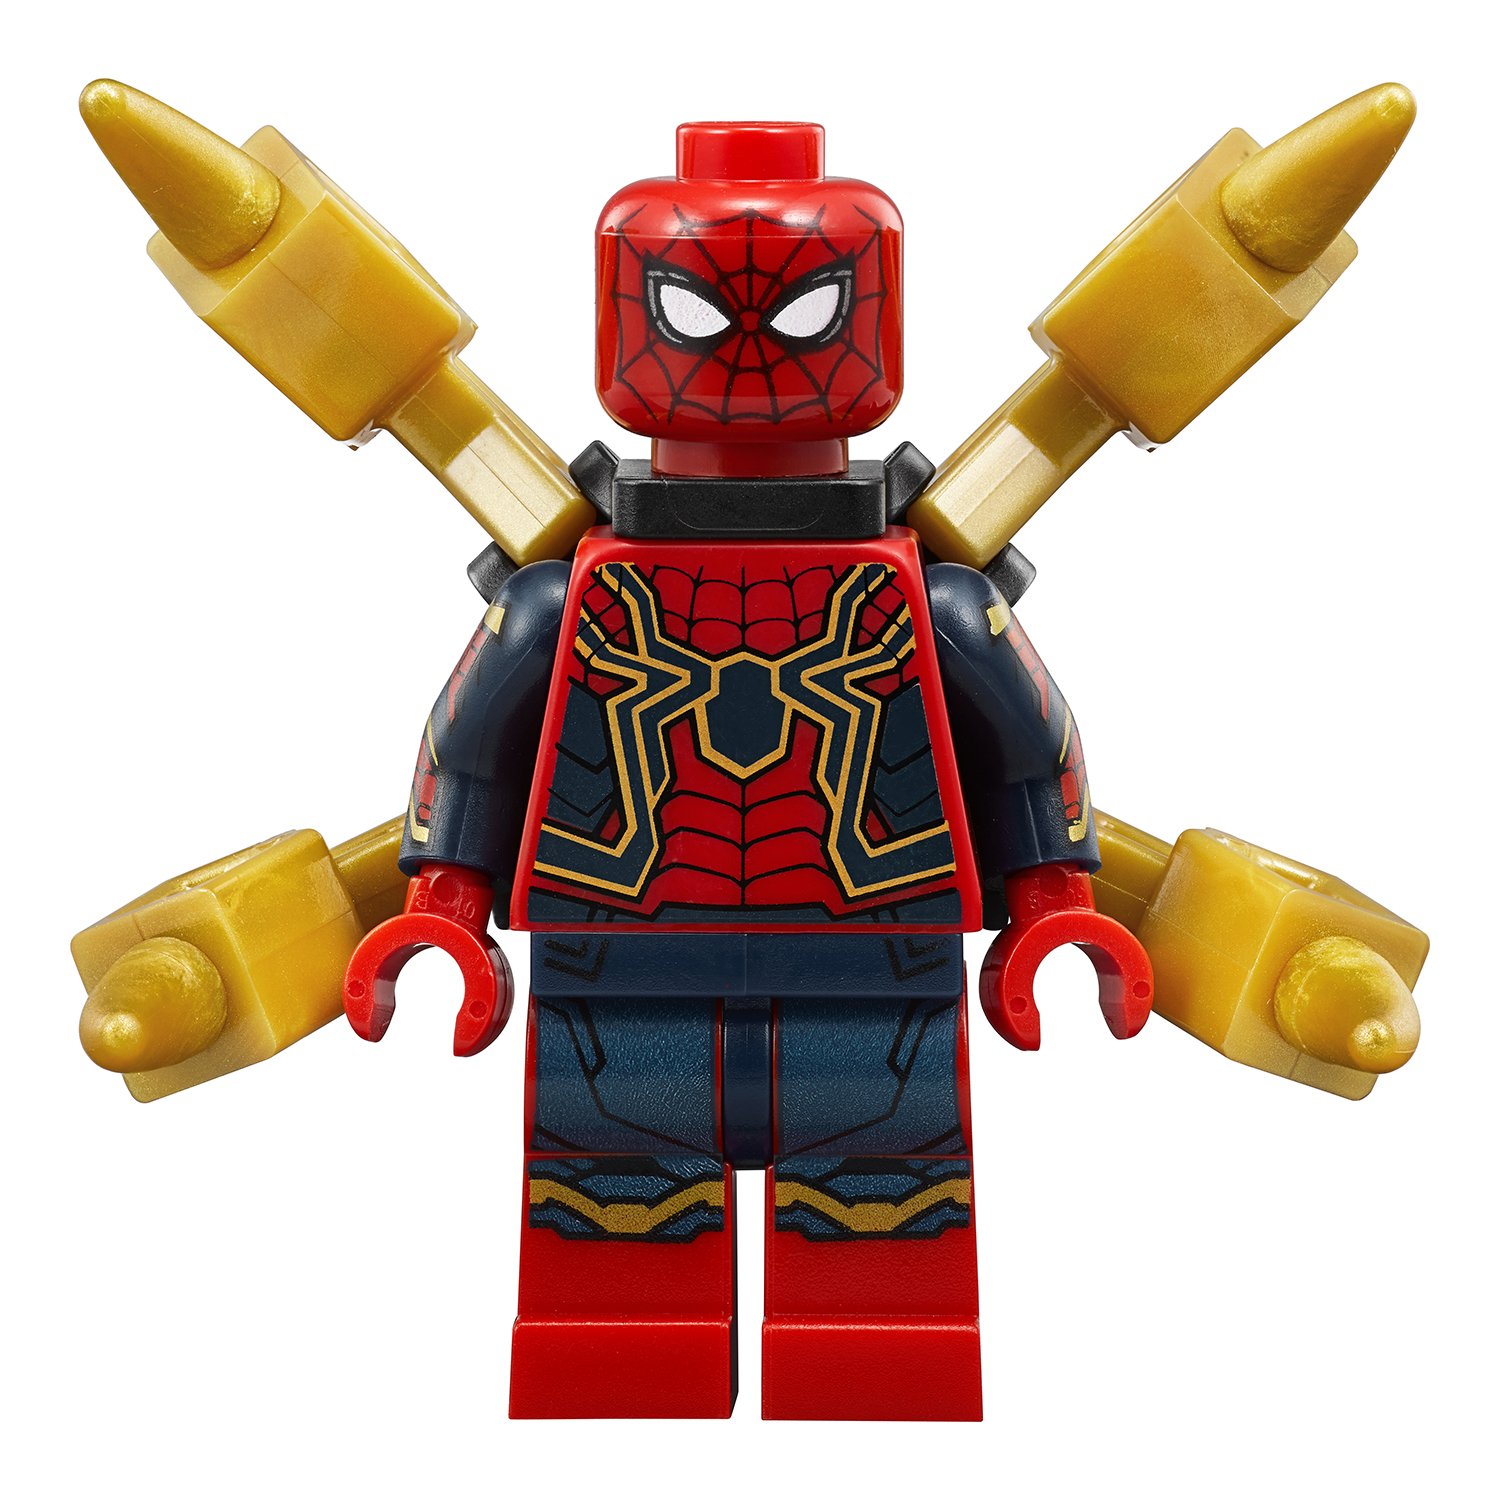 LEGO SUPER HEROES IRON-SPIDERMAN FROM SET 76108 